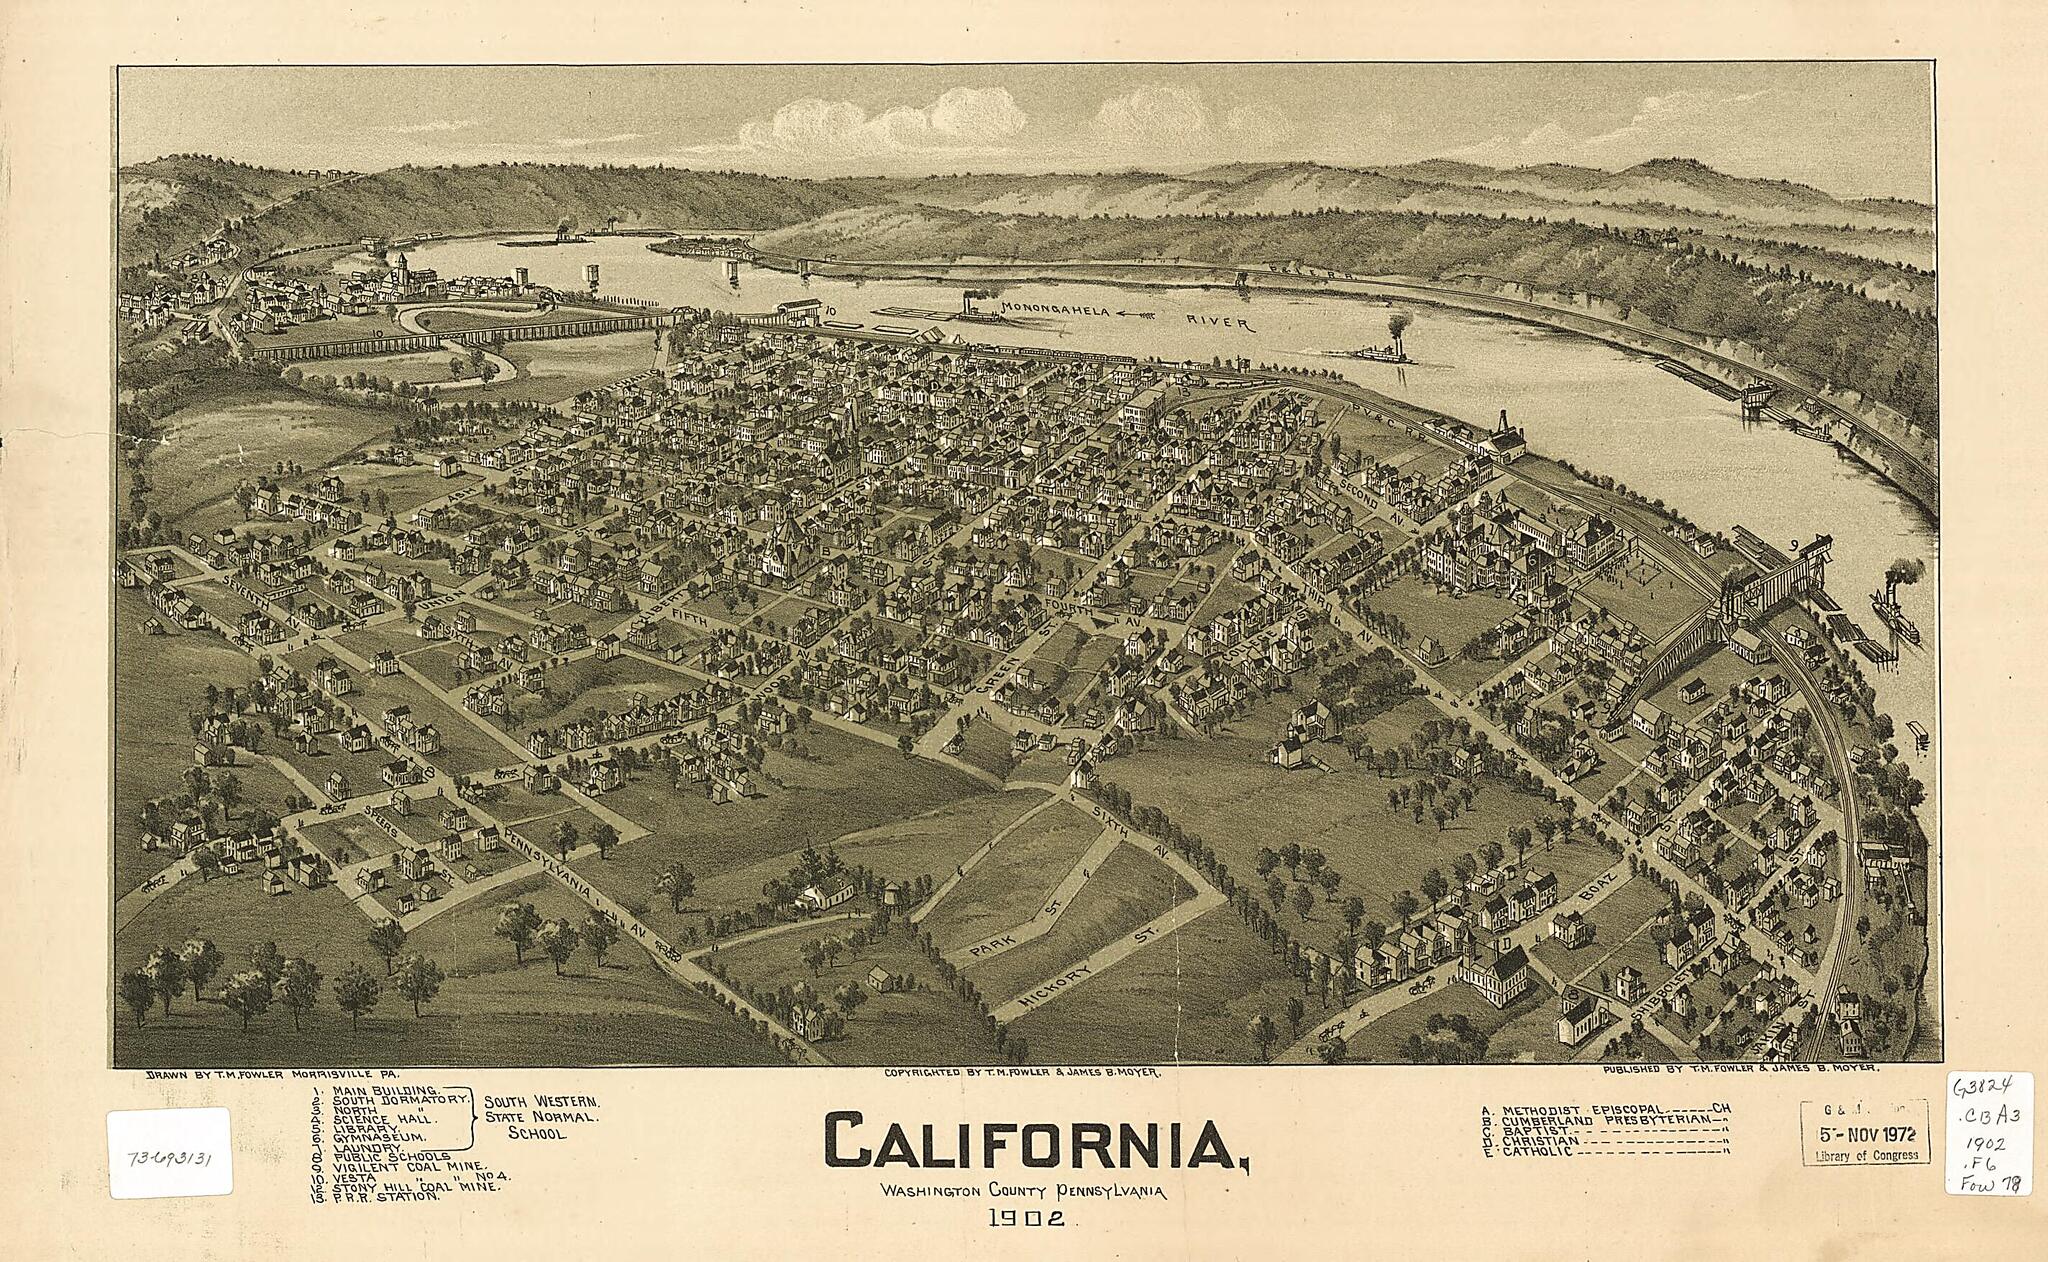 This old map of California, Washington County, Pennsylvania from 1902 was created by T. M. (Thaddeus Mortimer) Fowler, James B. Moyer in 1902